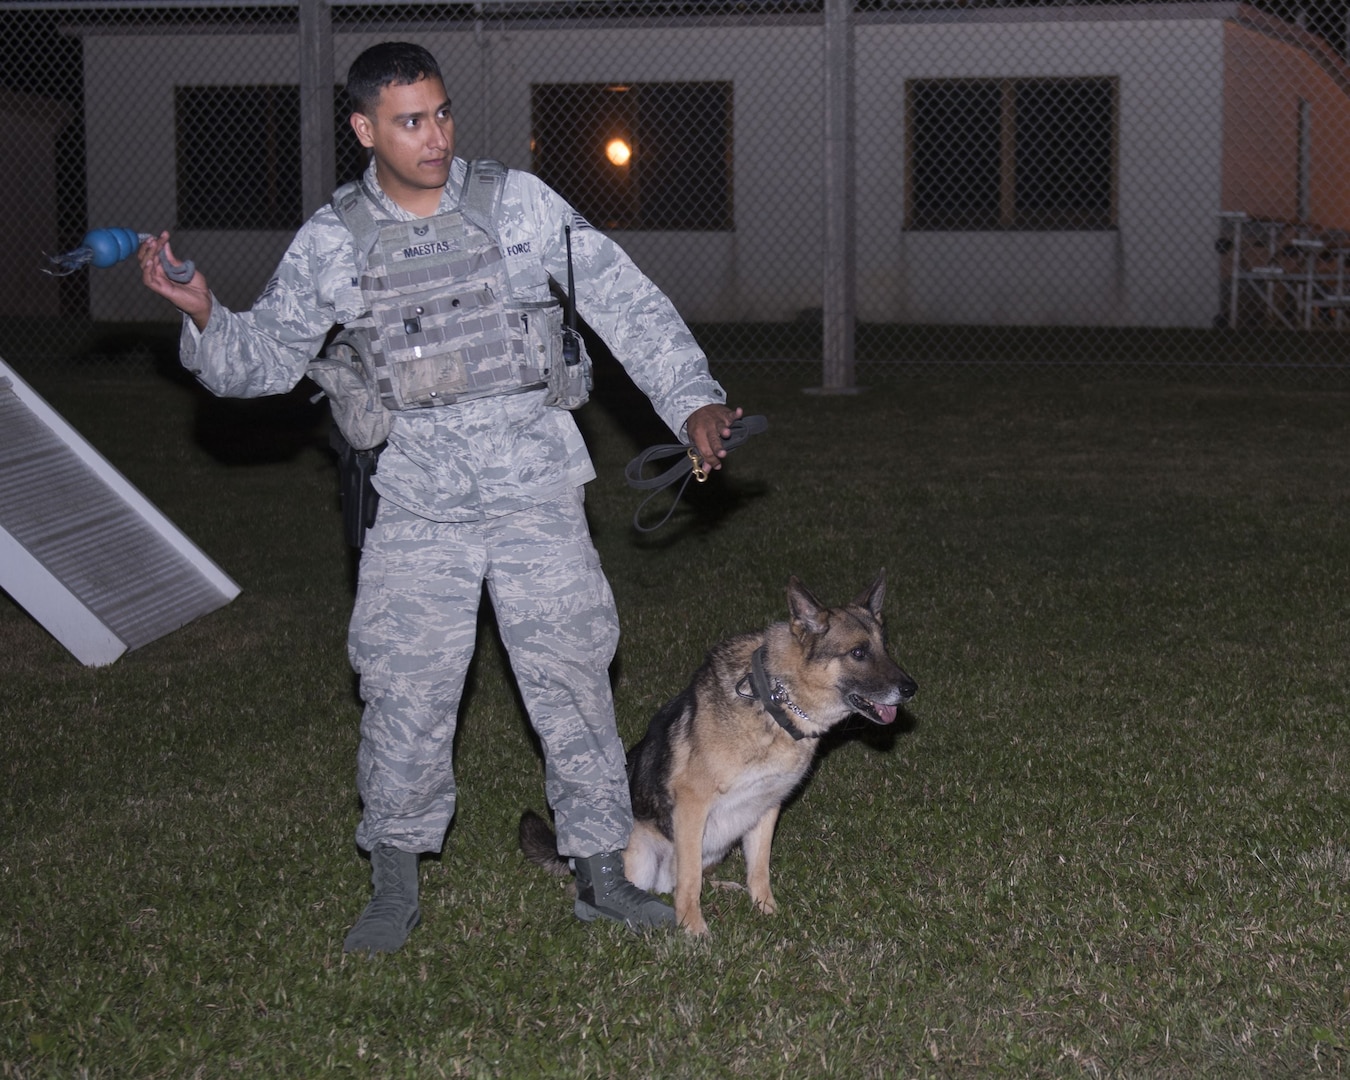 KitKat, 18th Security Forces Squadron military working dog, waits for his toy to be thrown by U.S. Air Force Staff Sgt. David Maestas, 18th SFS military working dog handler, during obedience training Dec. 12, 2017, at Kadena Air Base, Japan.